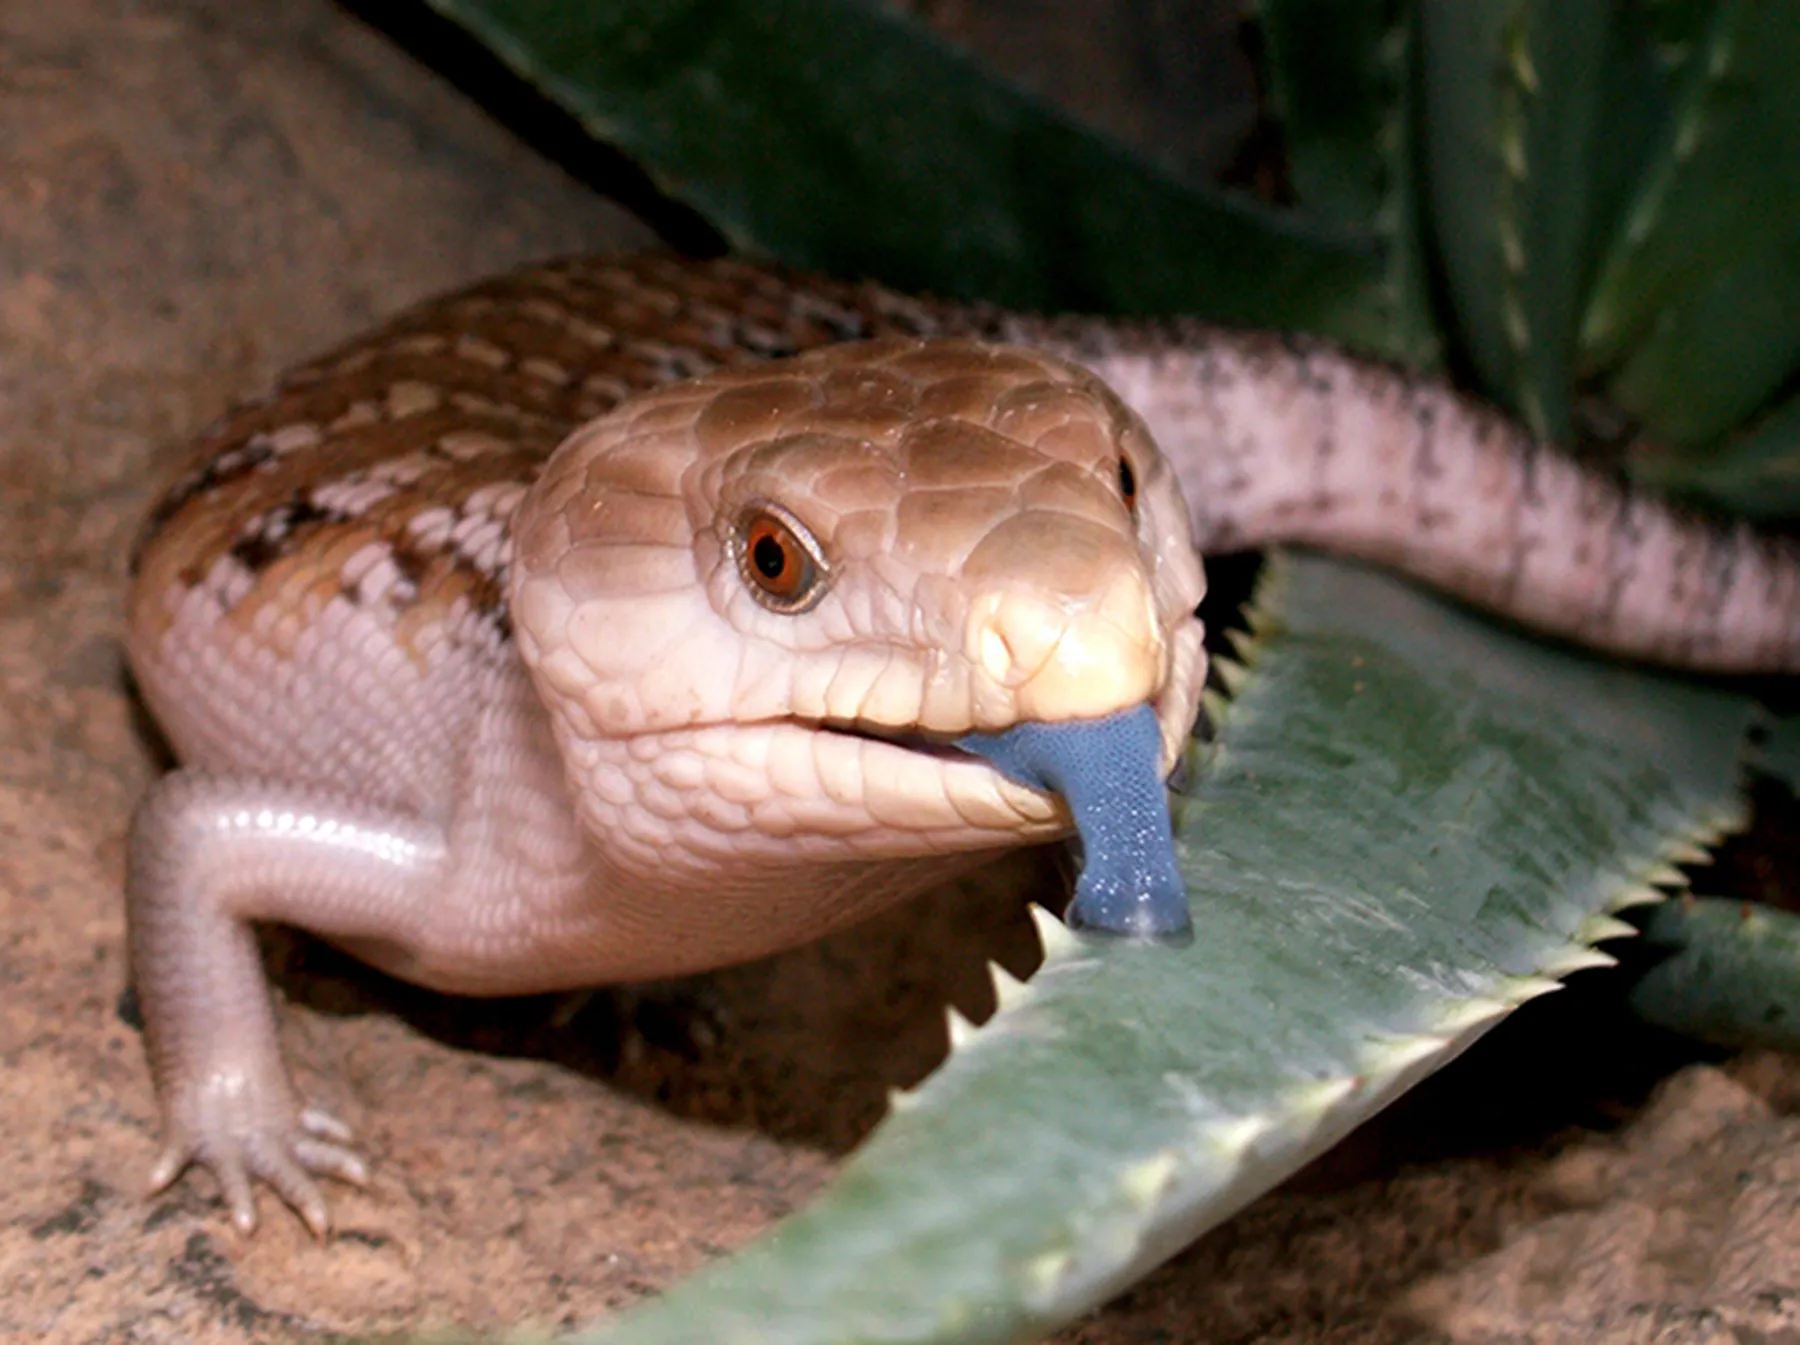 Blue-tongued skink licking a plant